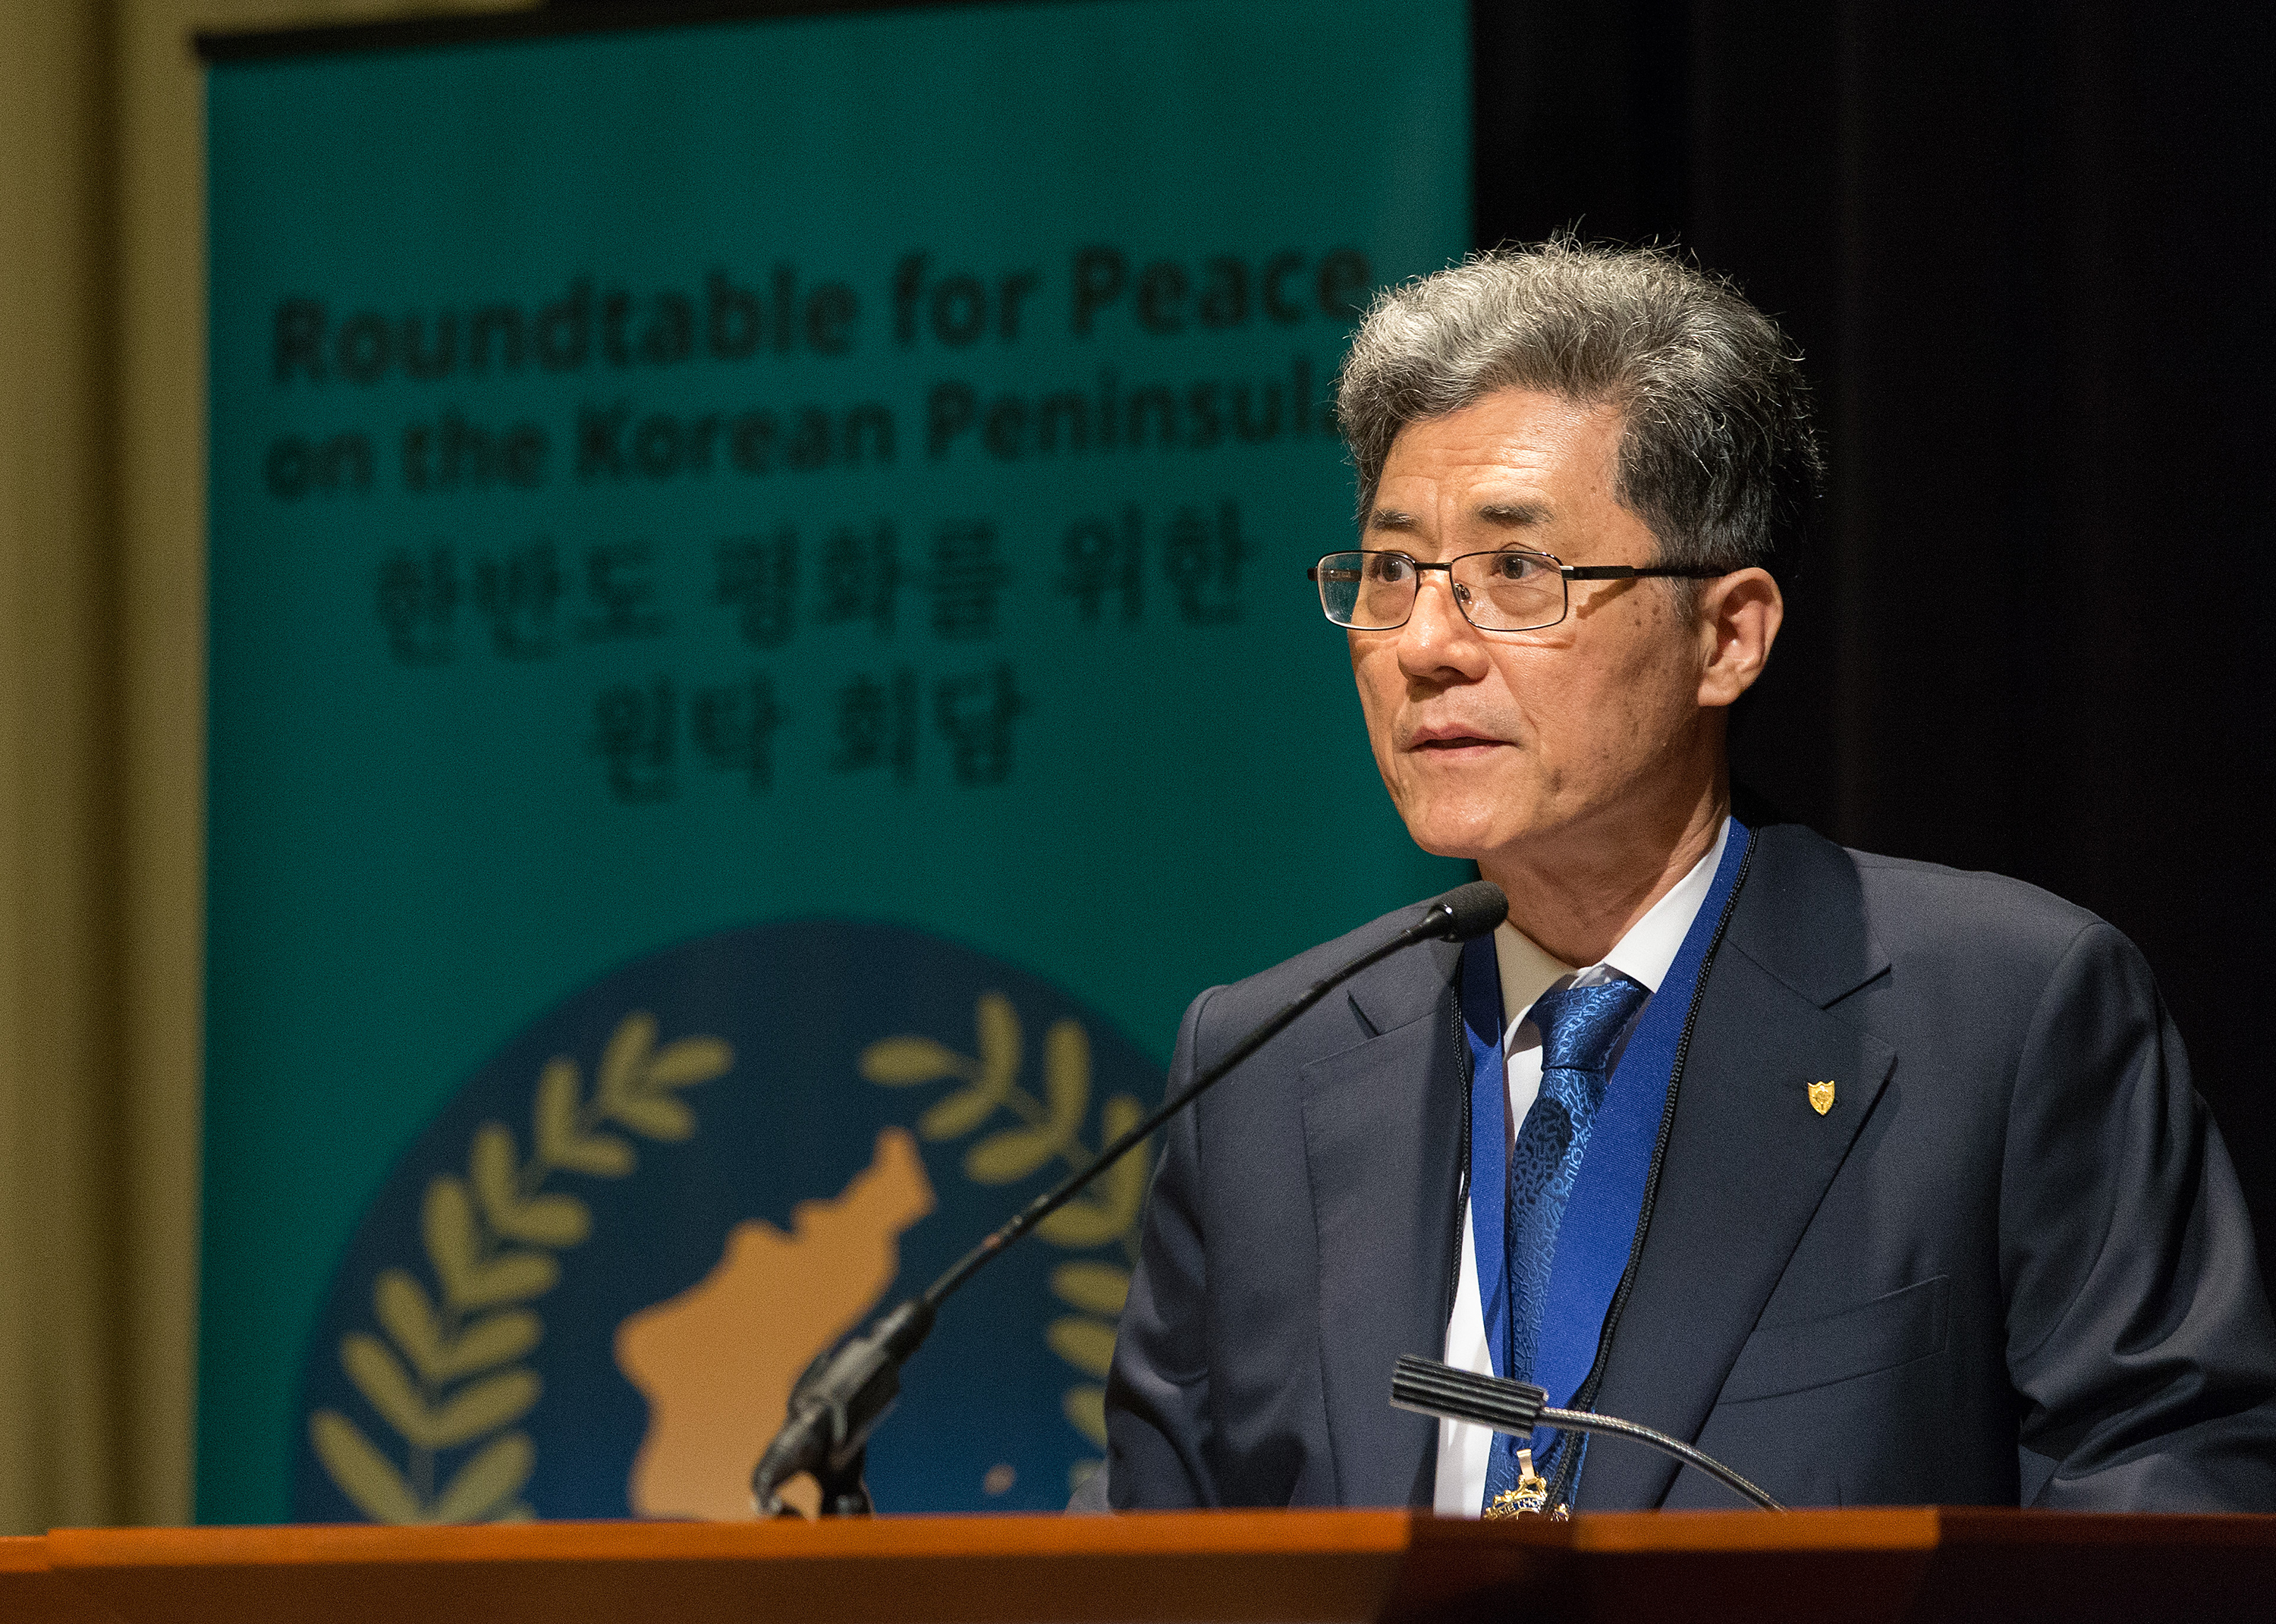 The Rev. Jong Chun Park brings greetings from the World Methodist Council to the Roundtable for Peace on the Korean Peninsula meeting in Atlanta. Photo by Mike DuBose, UMNS.